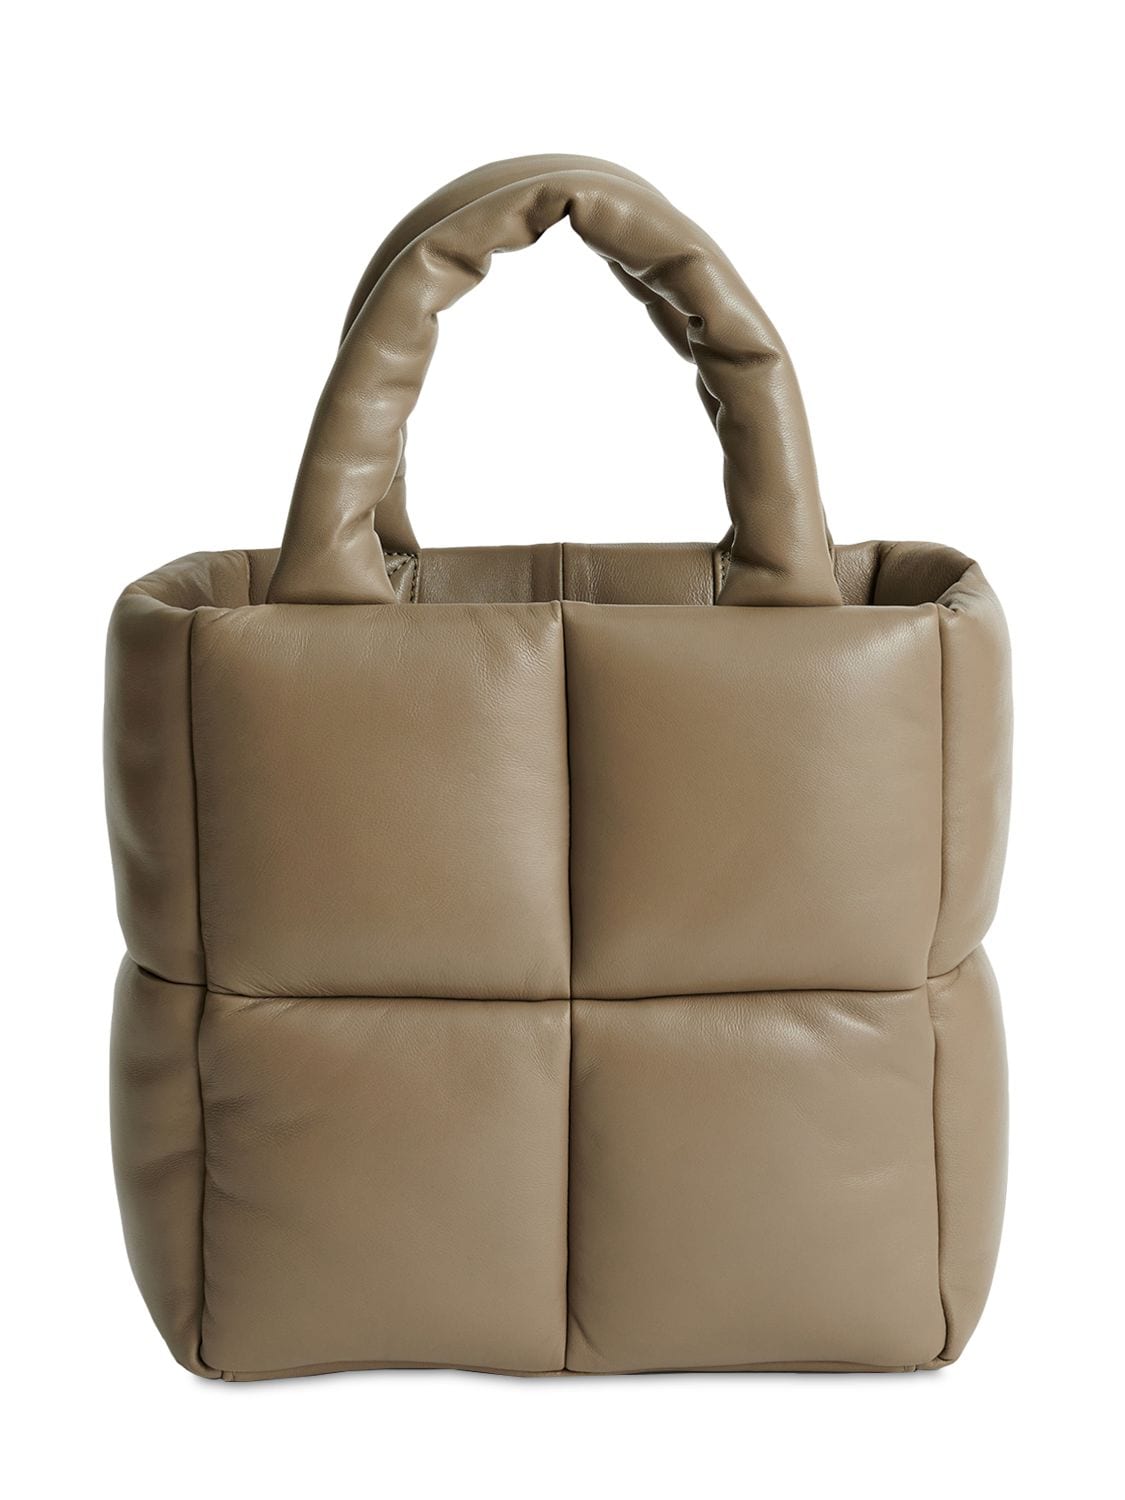 Stand Studio Rosanne Quilted Leather Tote Bag In Sandstone Beige